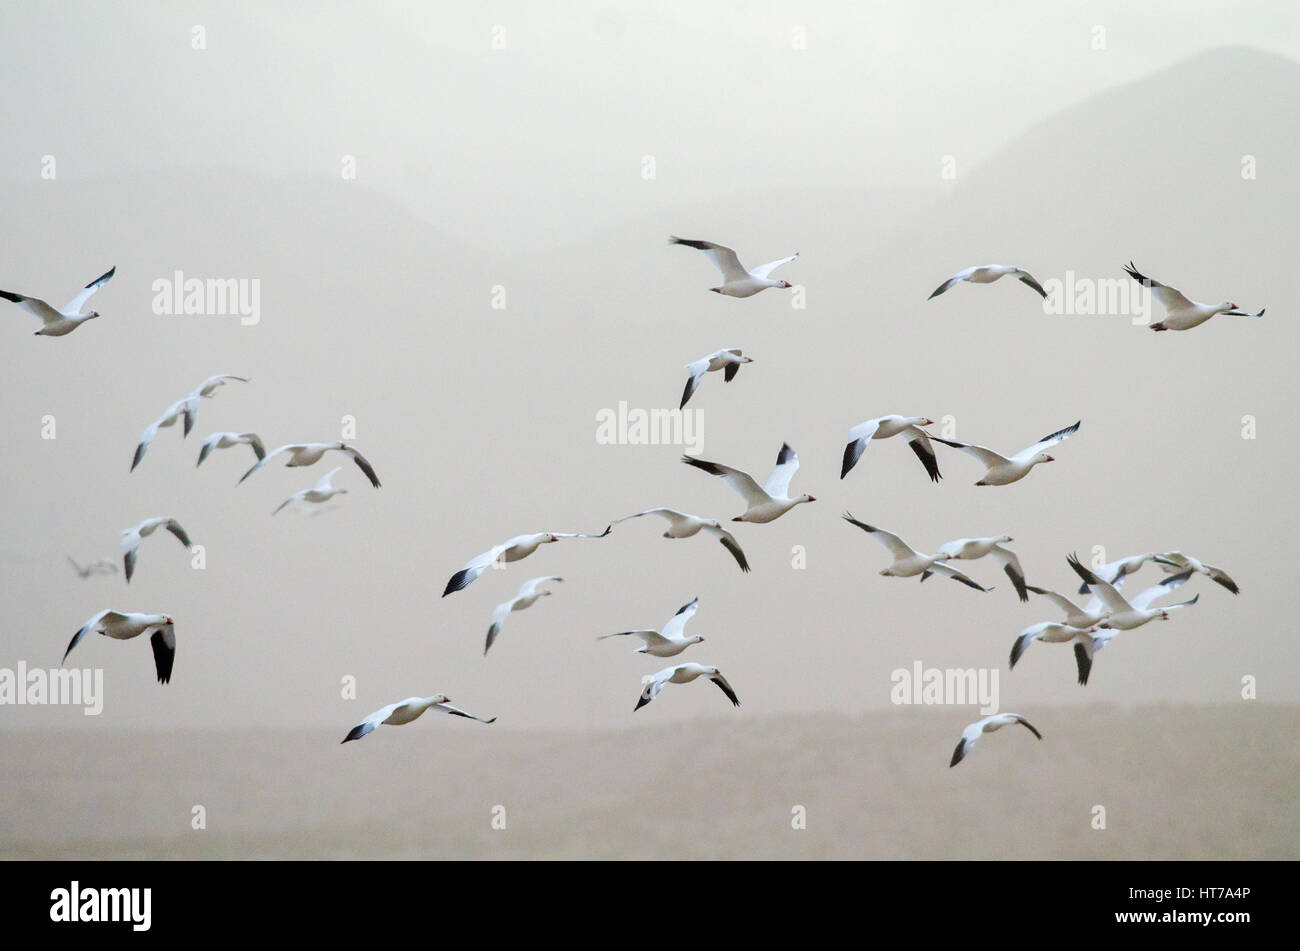 Snow and Ross's Geese flying in a dust storm at Bosque del Apache National Wildlife Refuge, New Mexico, USA. Stock Photo